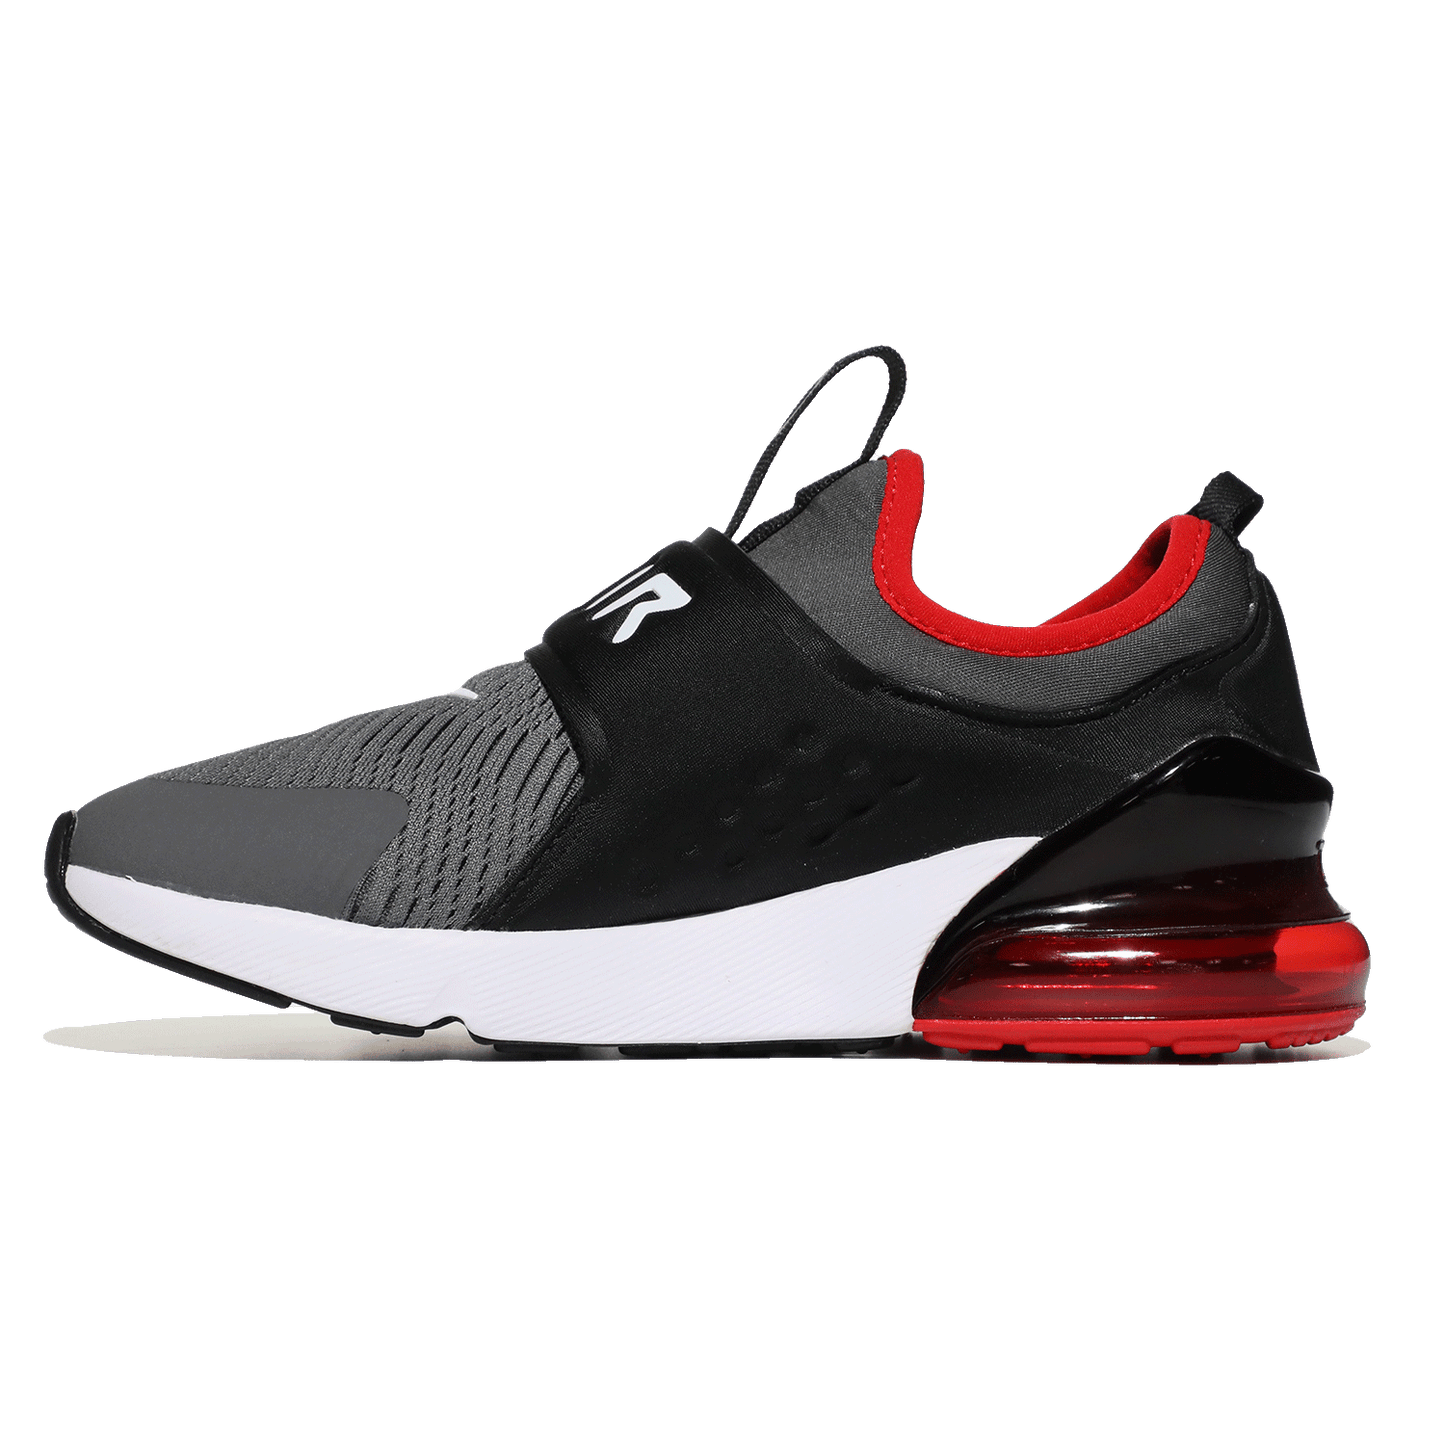 Image 6 of Air Max 270 Extreme (Little Kid)